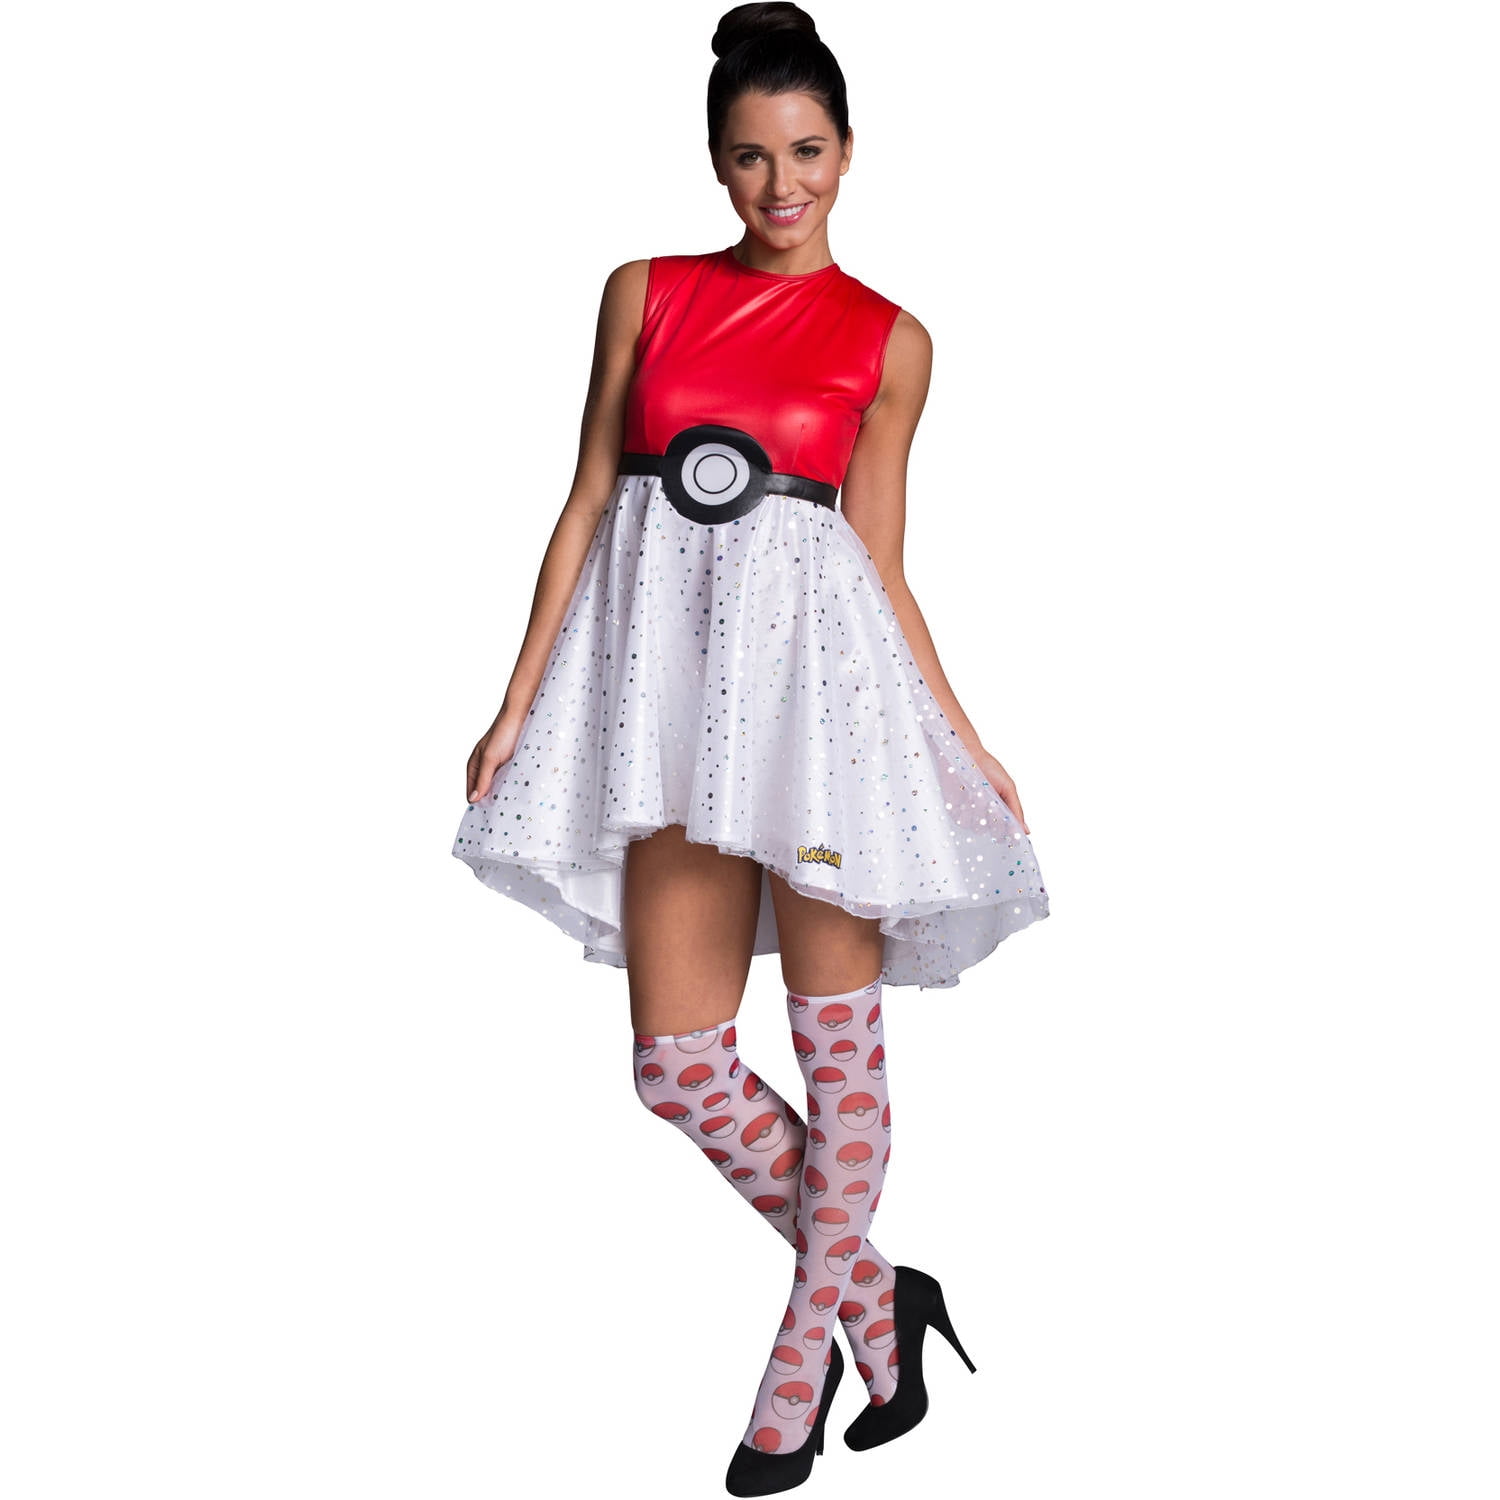 Details about   Pokemon Pokeball Classic Adult Costume